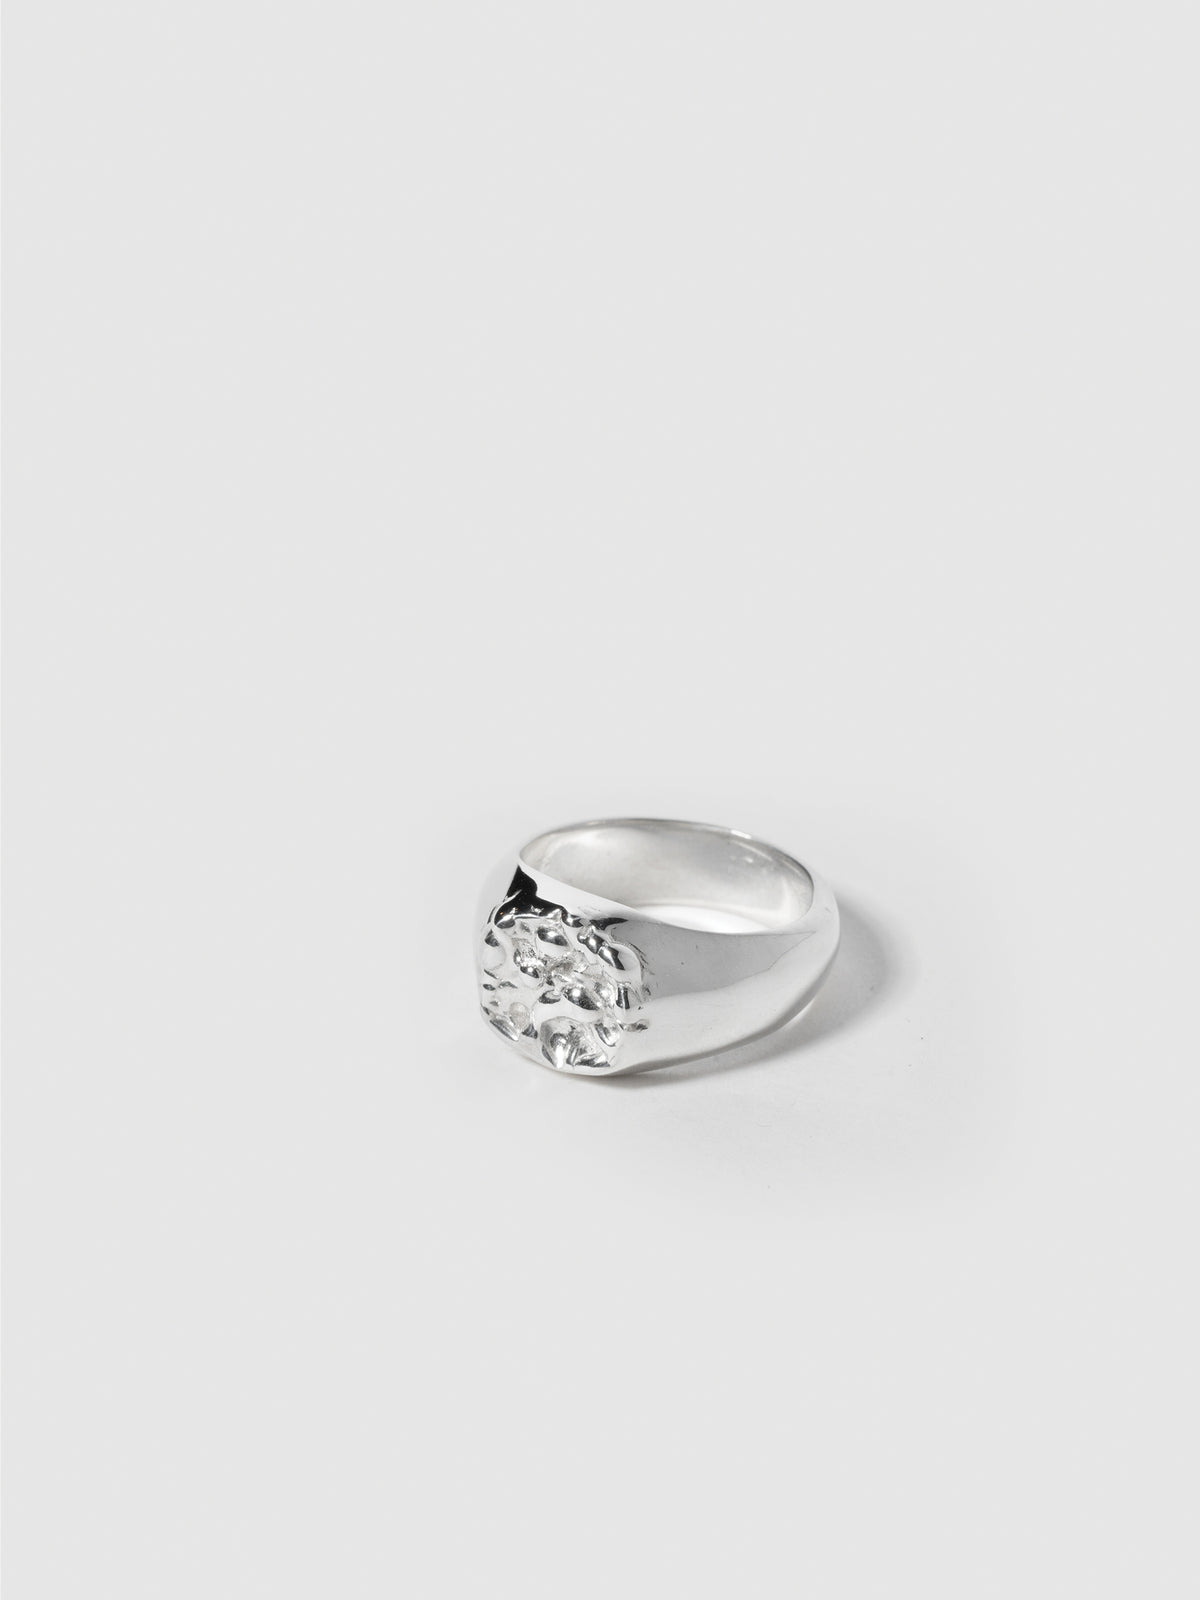 Product image of ROCA CROWN Signet in sterling silver